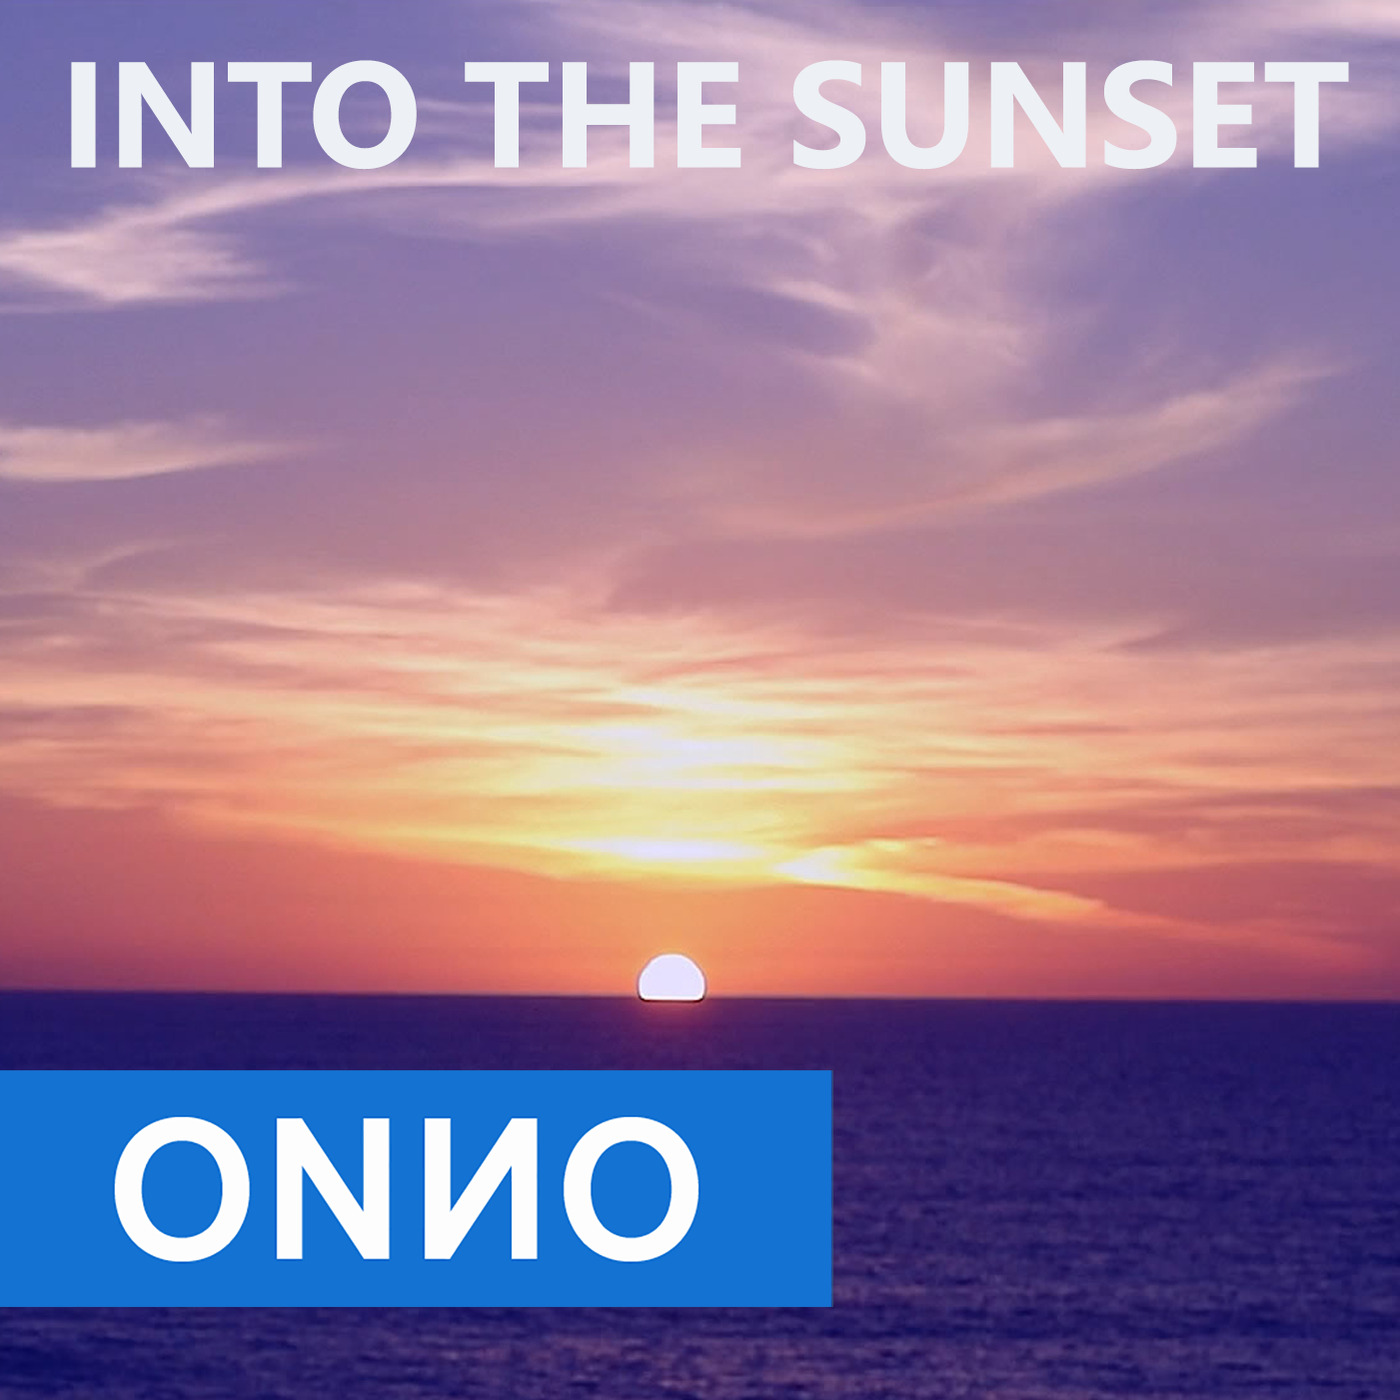 Onno Boomstra - INTO THE SUNSET